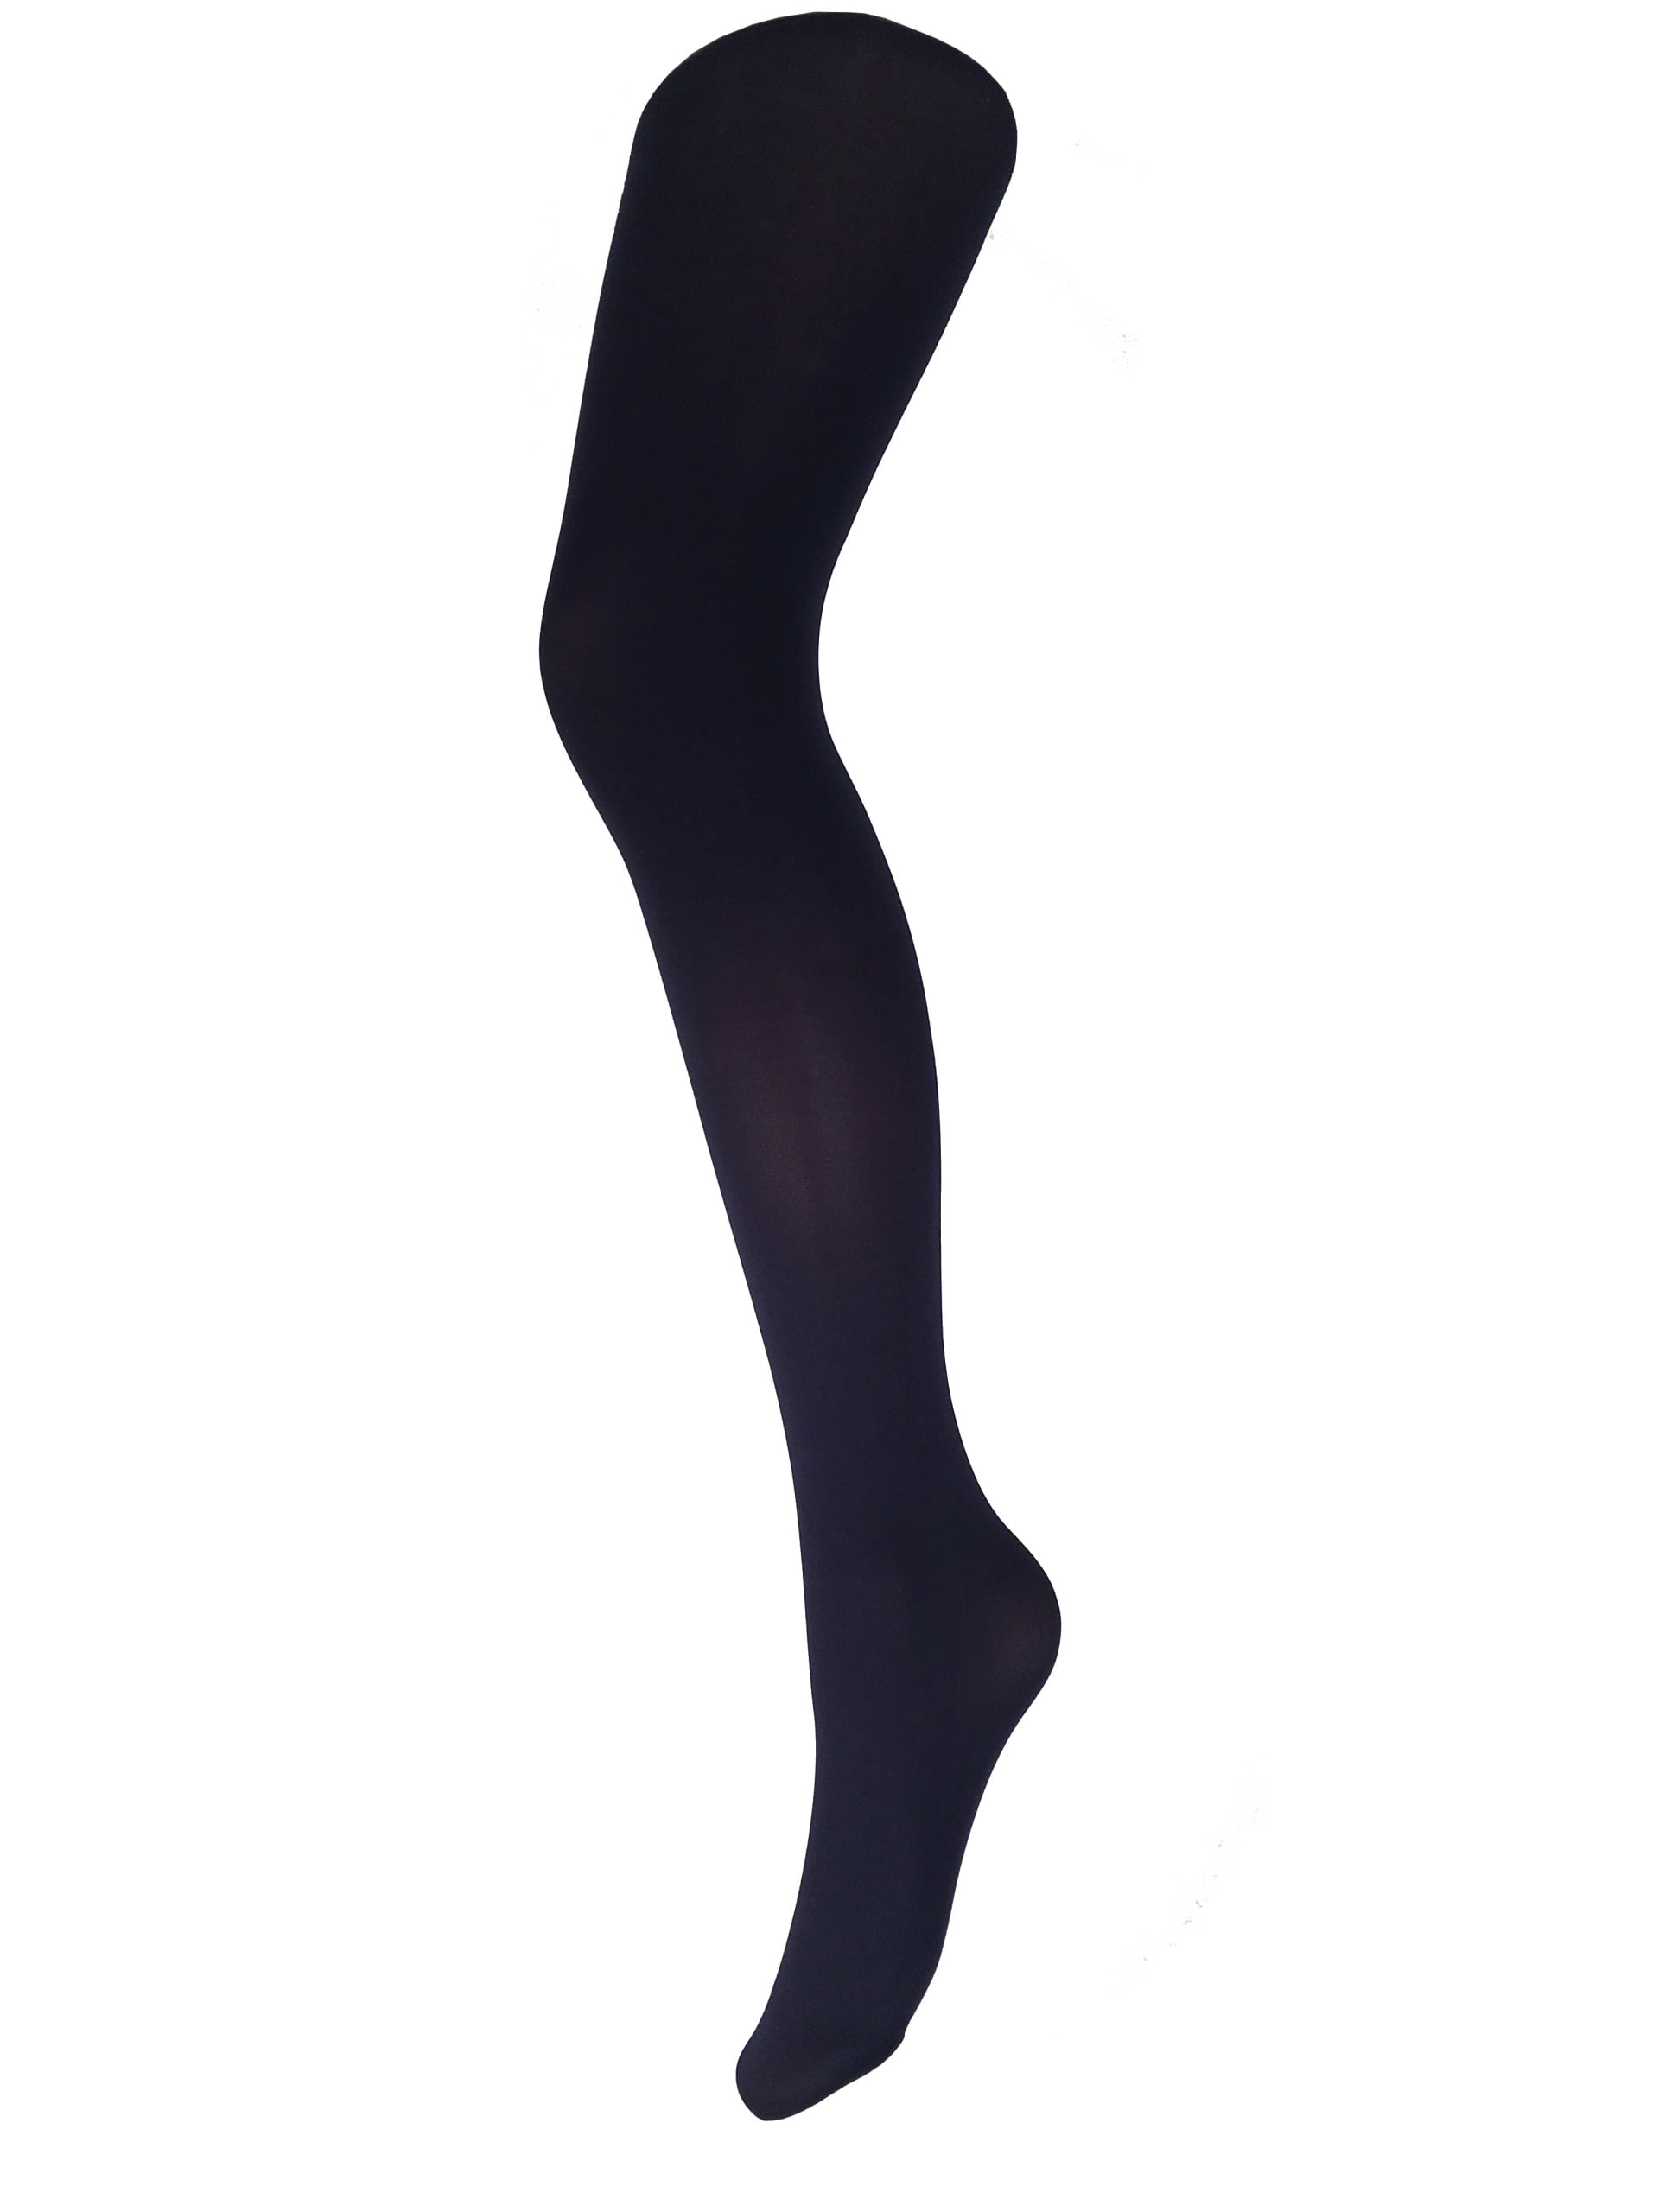 Malka Chic - Dark Navy Blue Opaque full footed Tights, Pantyhose for ...